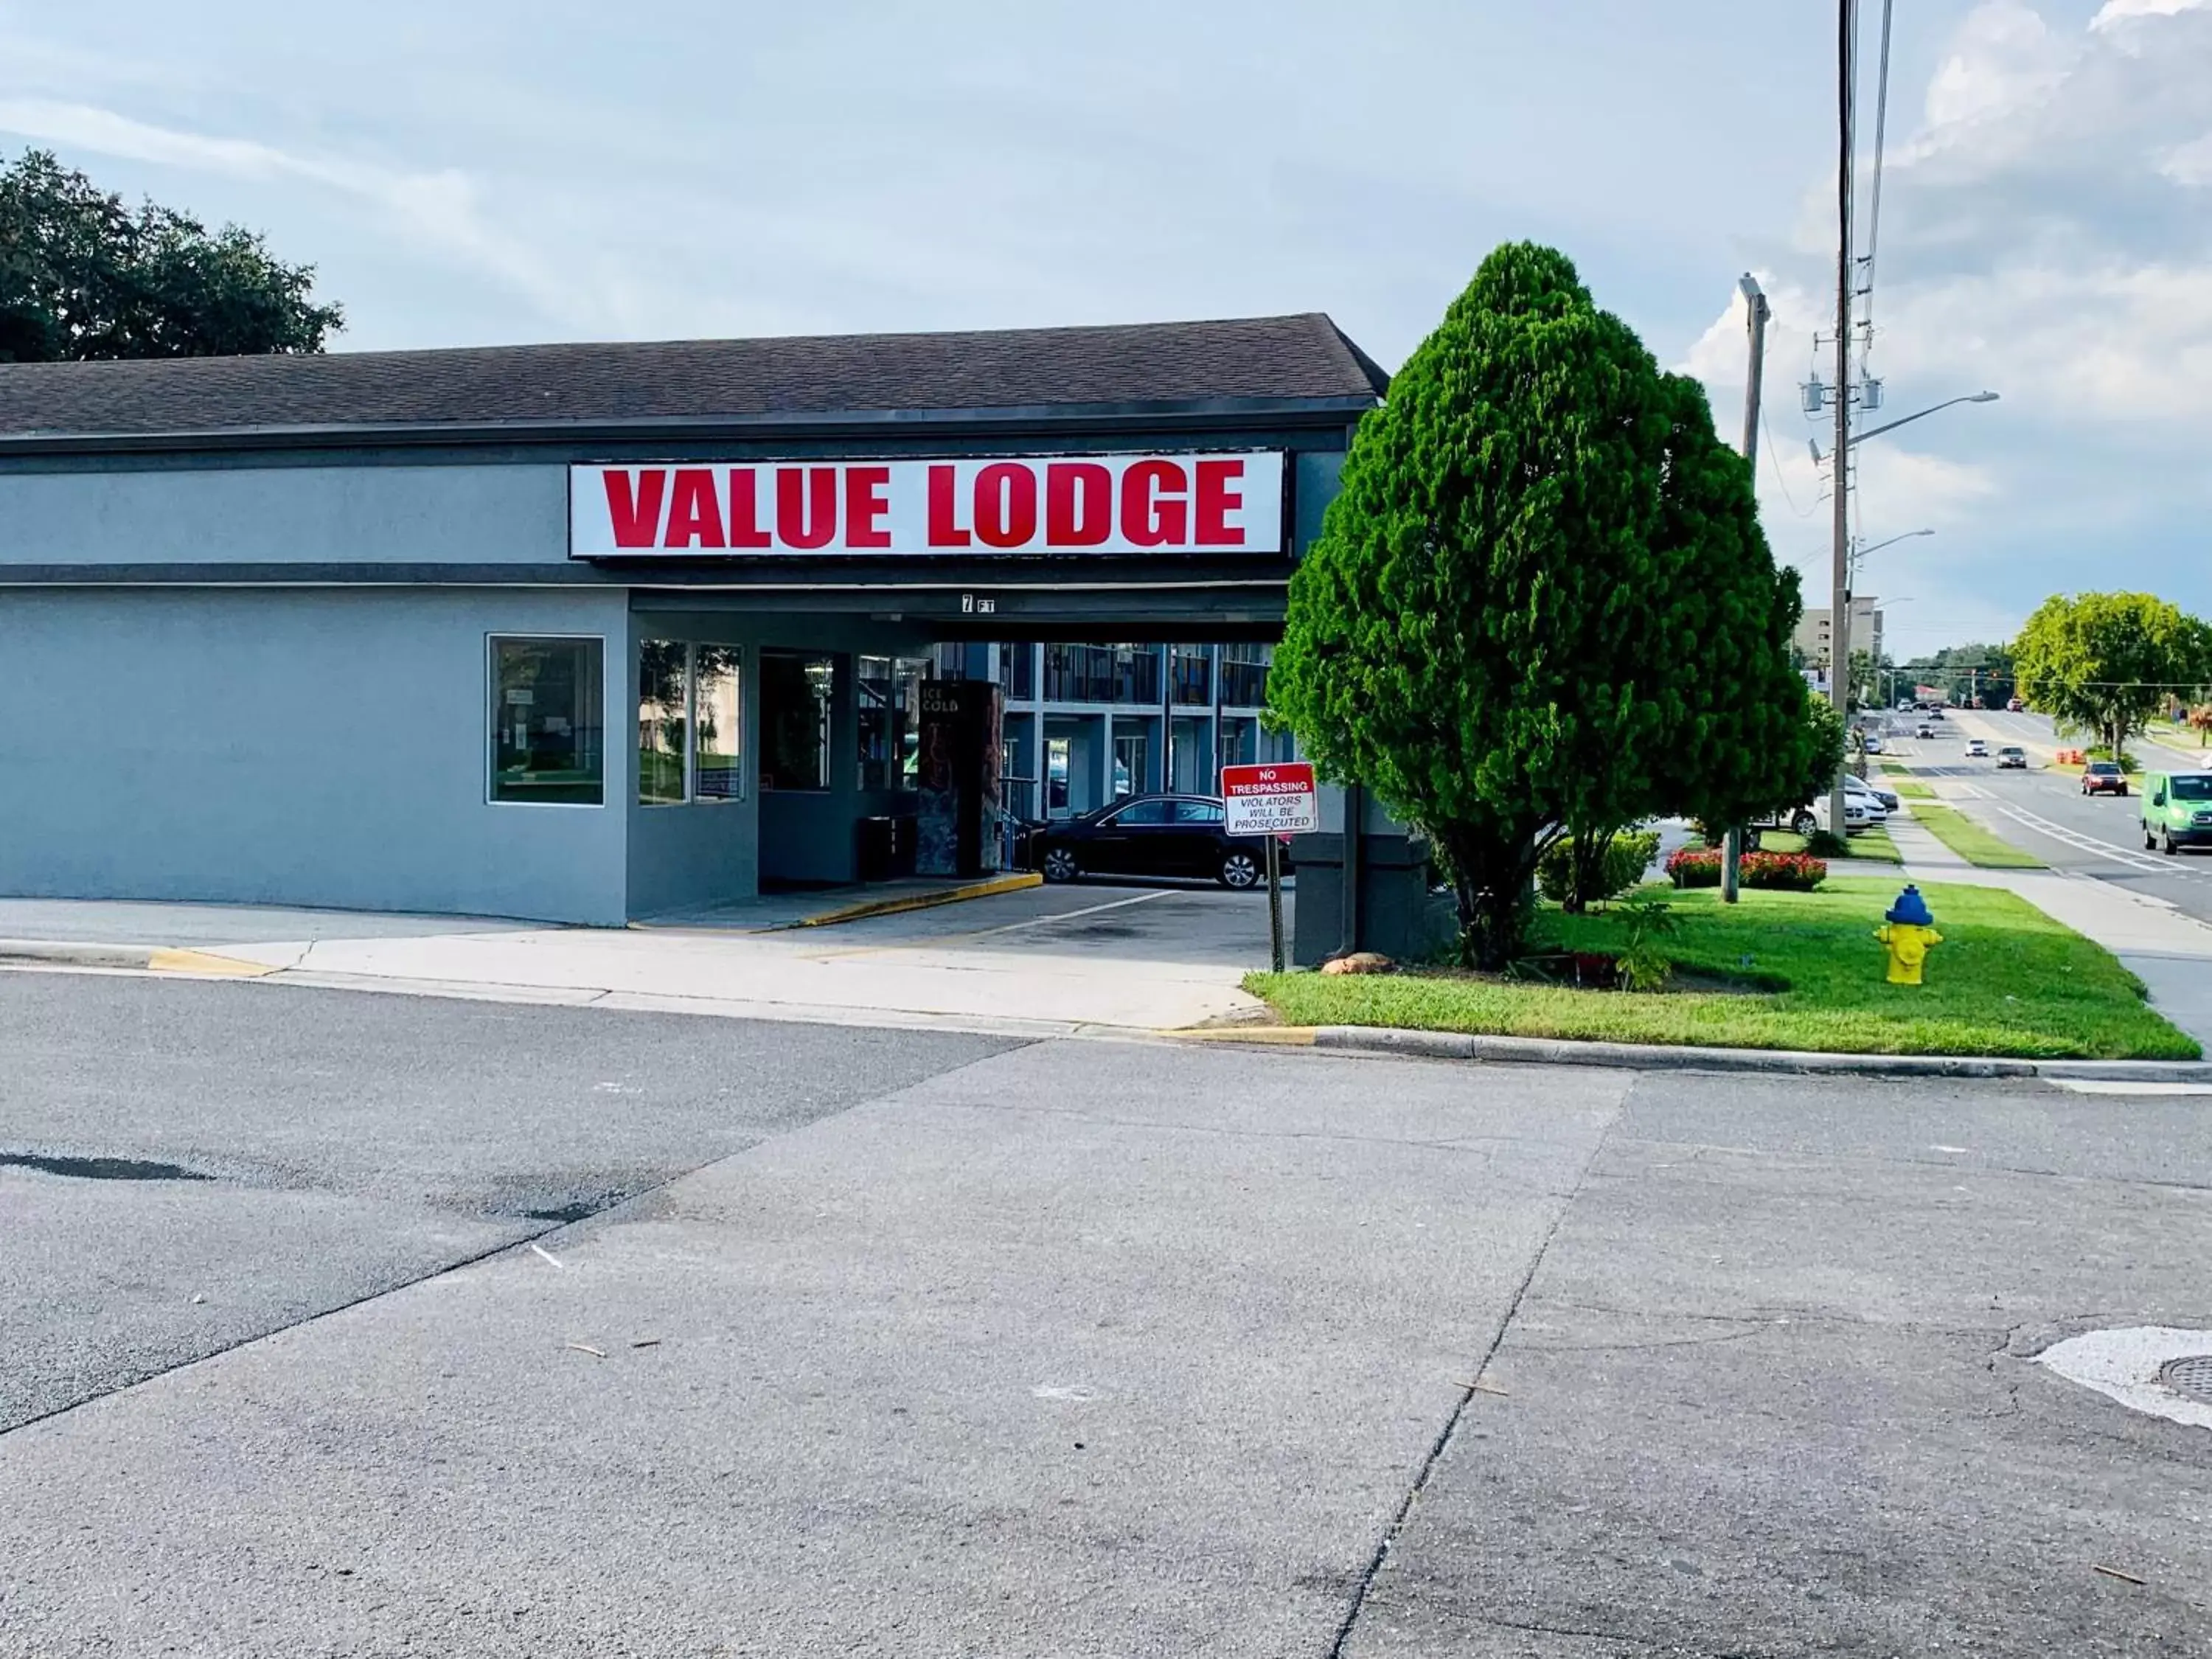 Property Building in Value Lodge - Gainesville